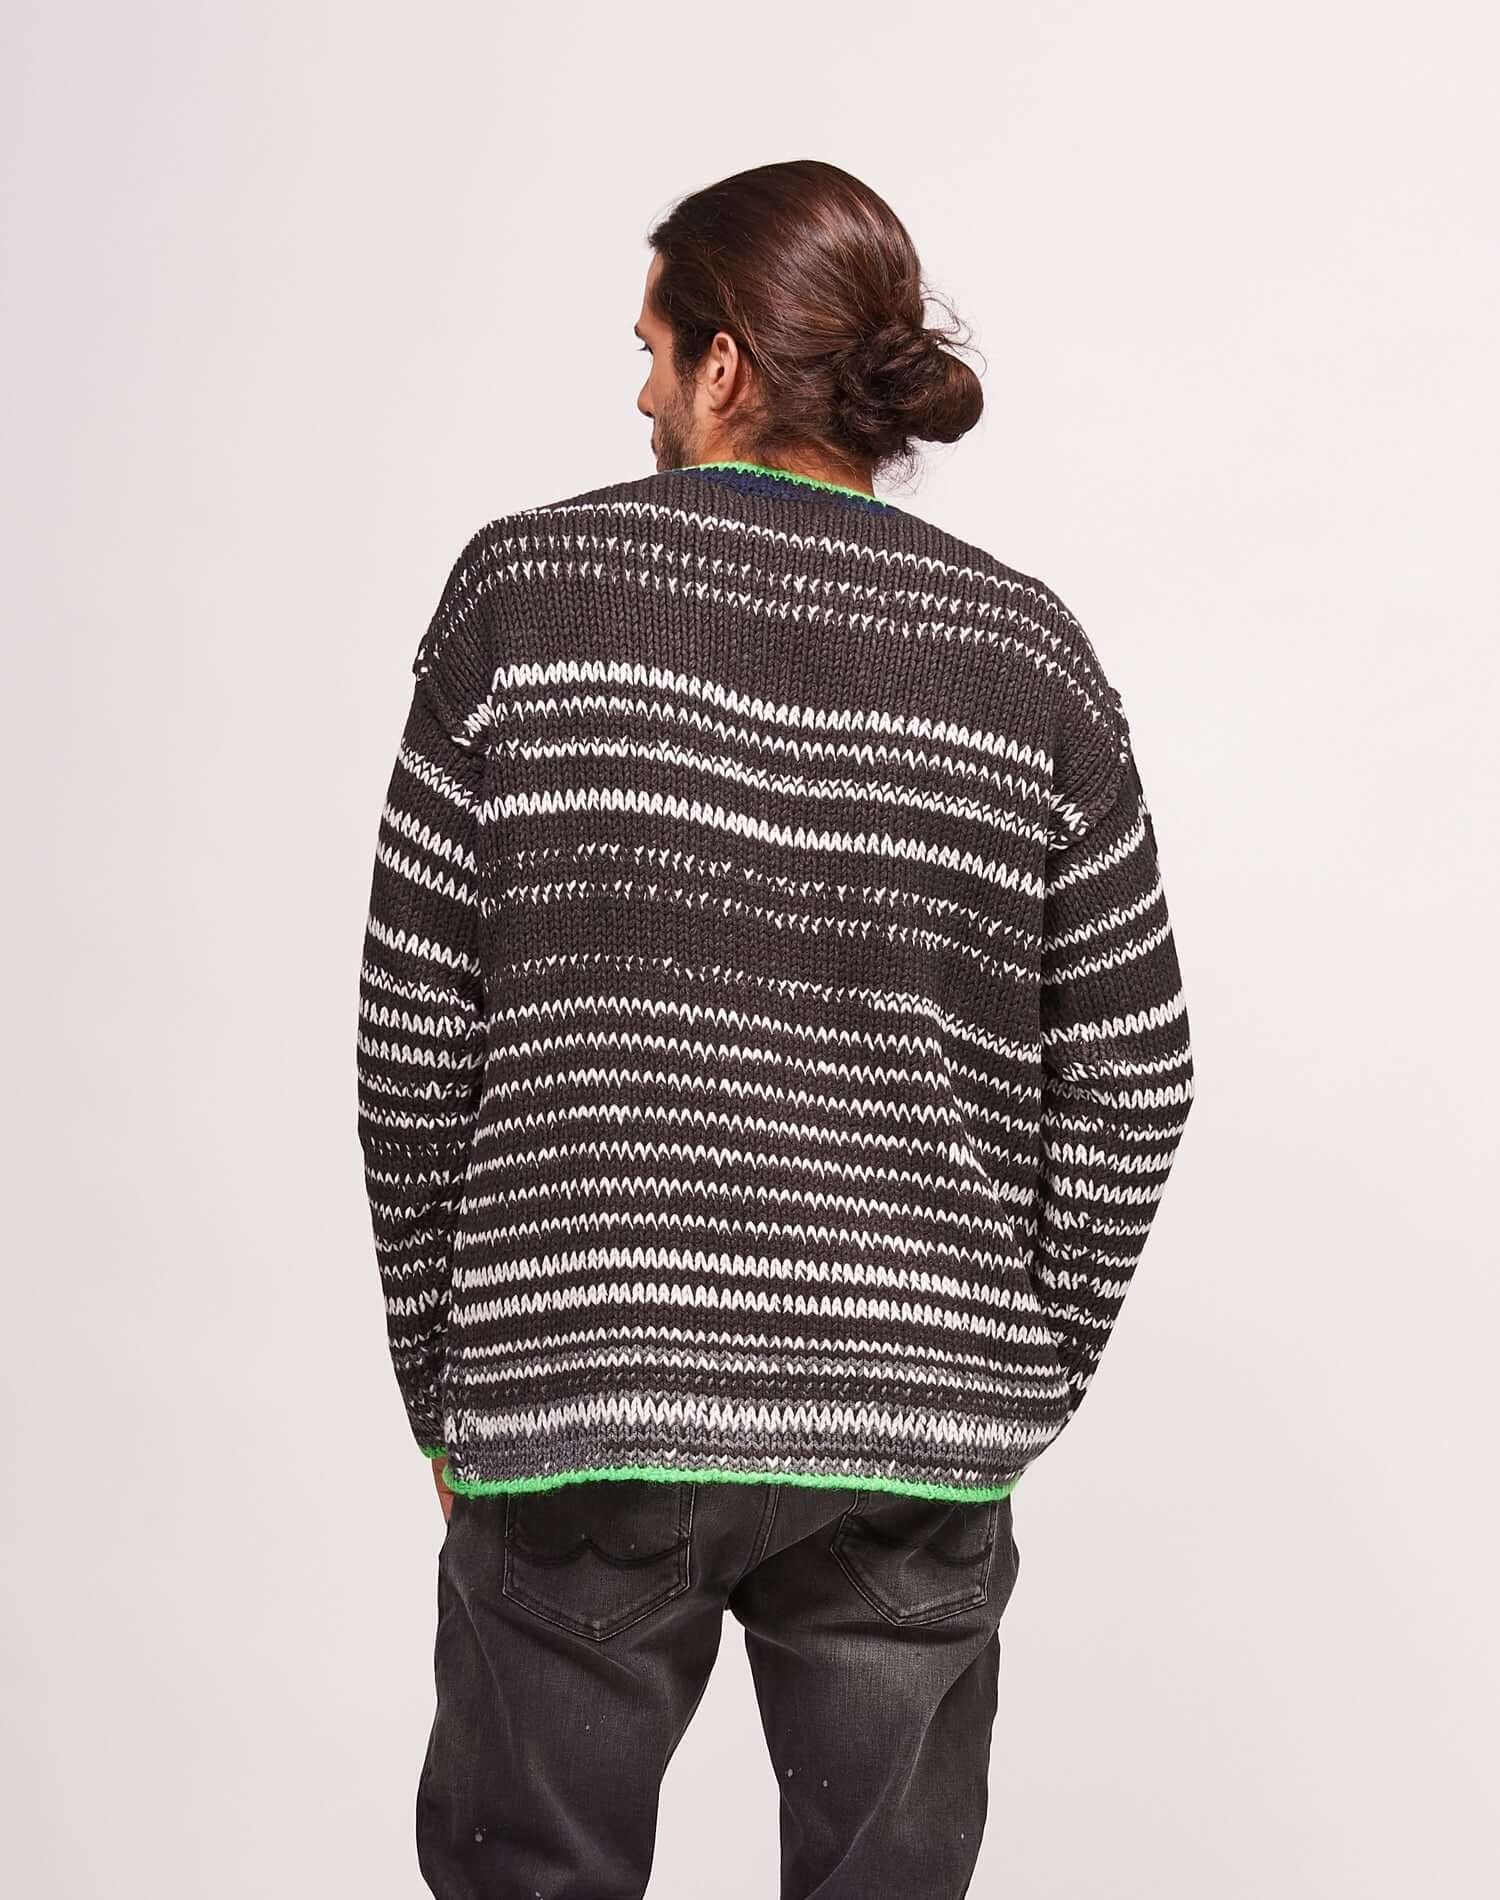 JOHNNY JUMPER Crew neck striped jumper. HTC logo on the front. 50% Acrylic 50% wool. Made in Italy. HTC LOS ANGELES